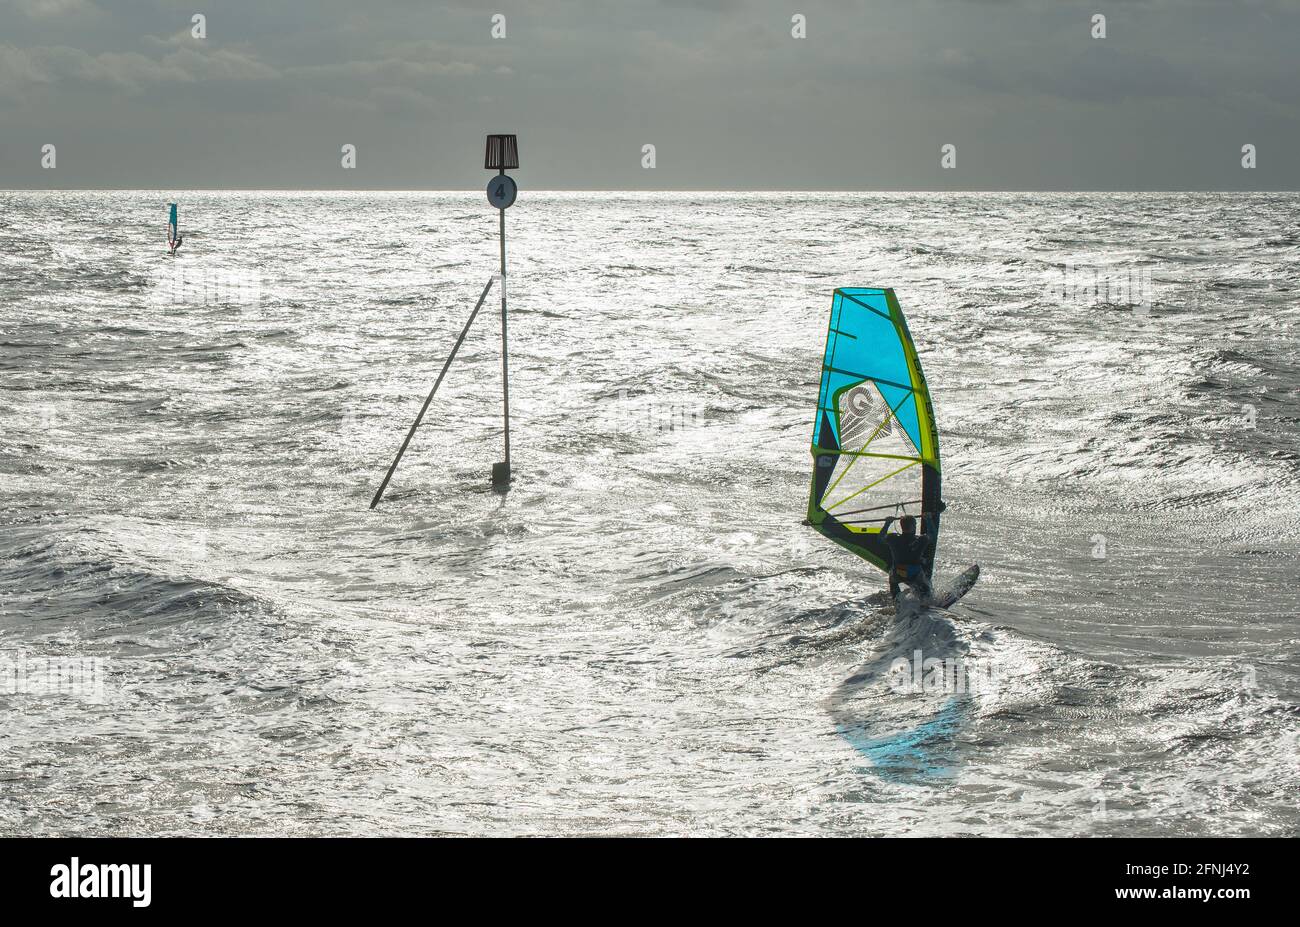 Spectacular image of two windsurfers skimming across a silvery sea with their colourful sails reflected on the water and a dark sky horizon backdrop Stock Photo